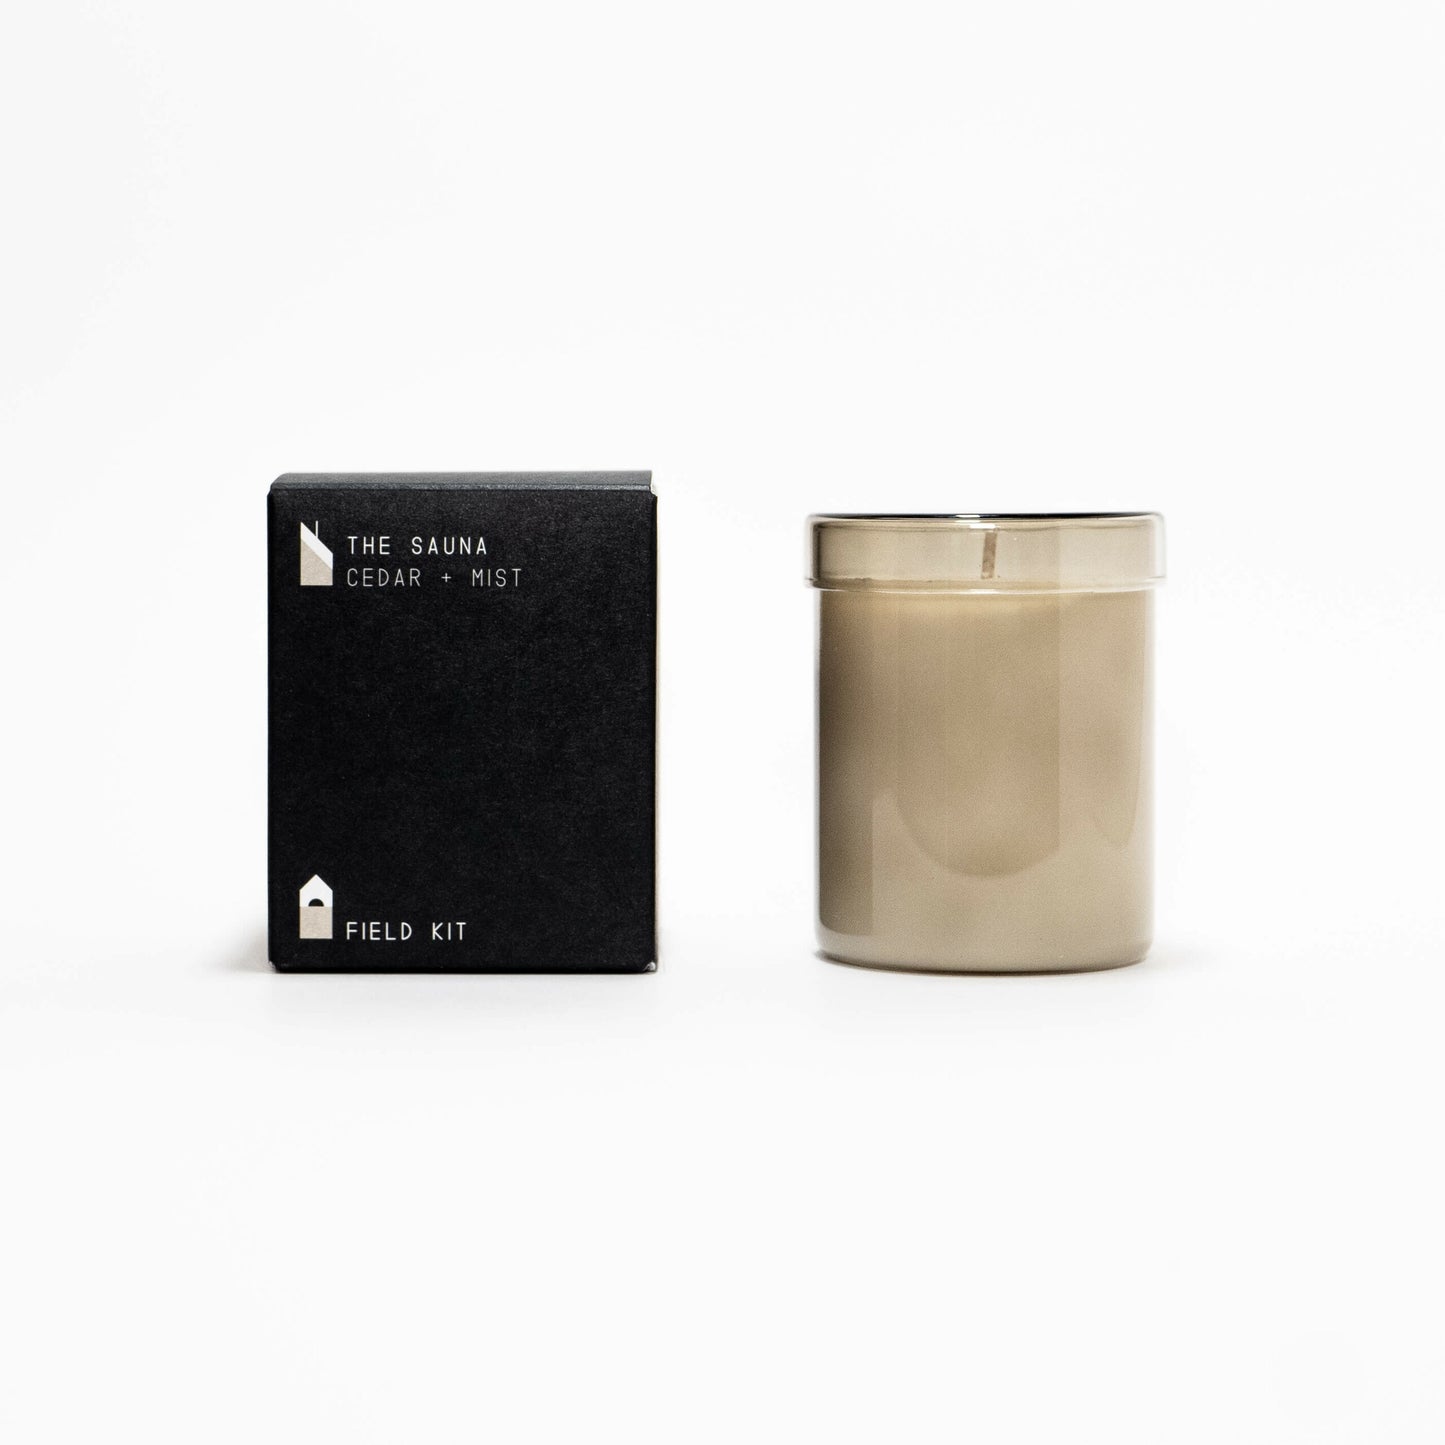 The Sauna Scented Candle by Field Kit